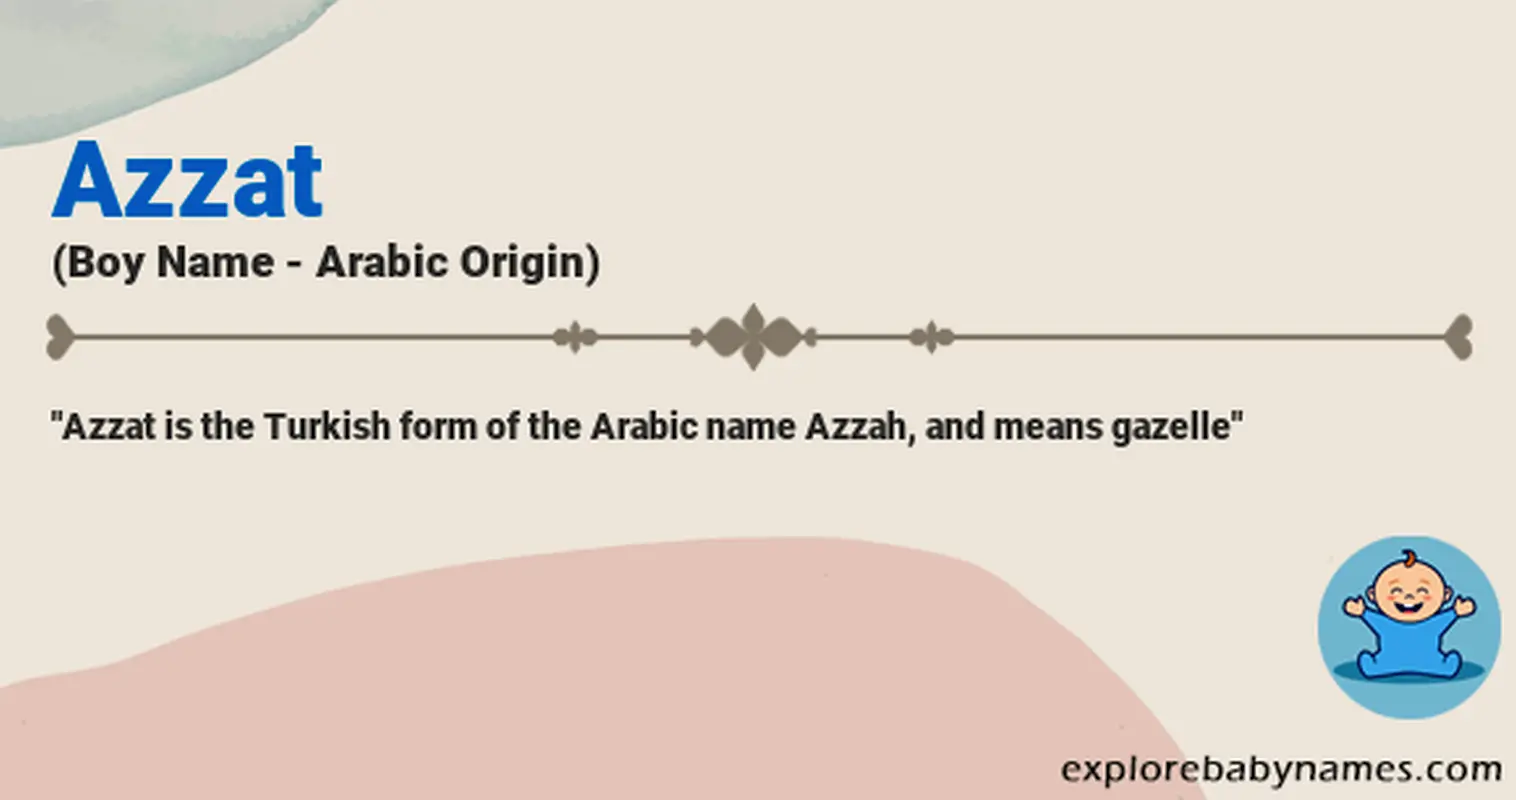 Meaning of Azzat